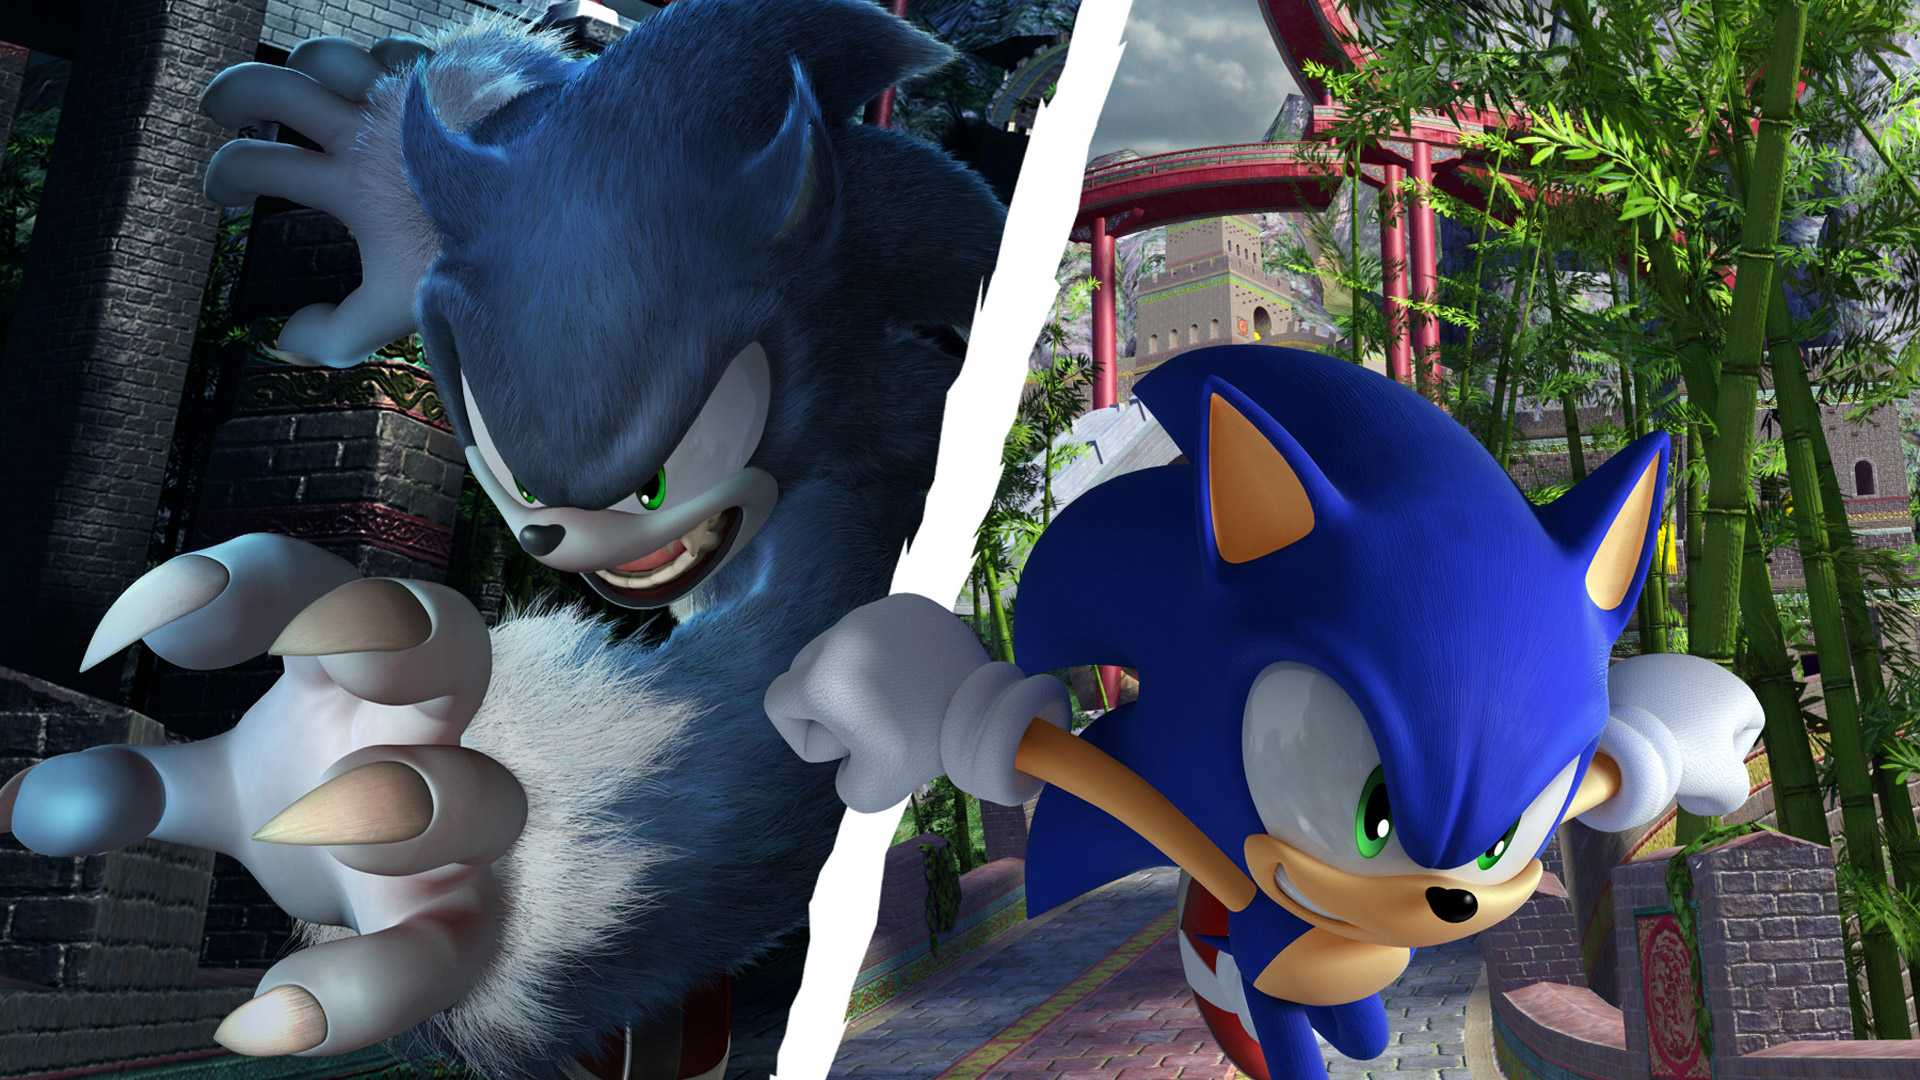 sonic unleashed pc download utorrent